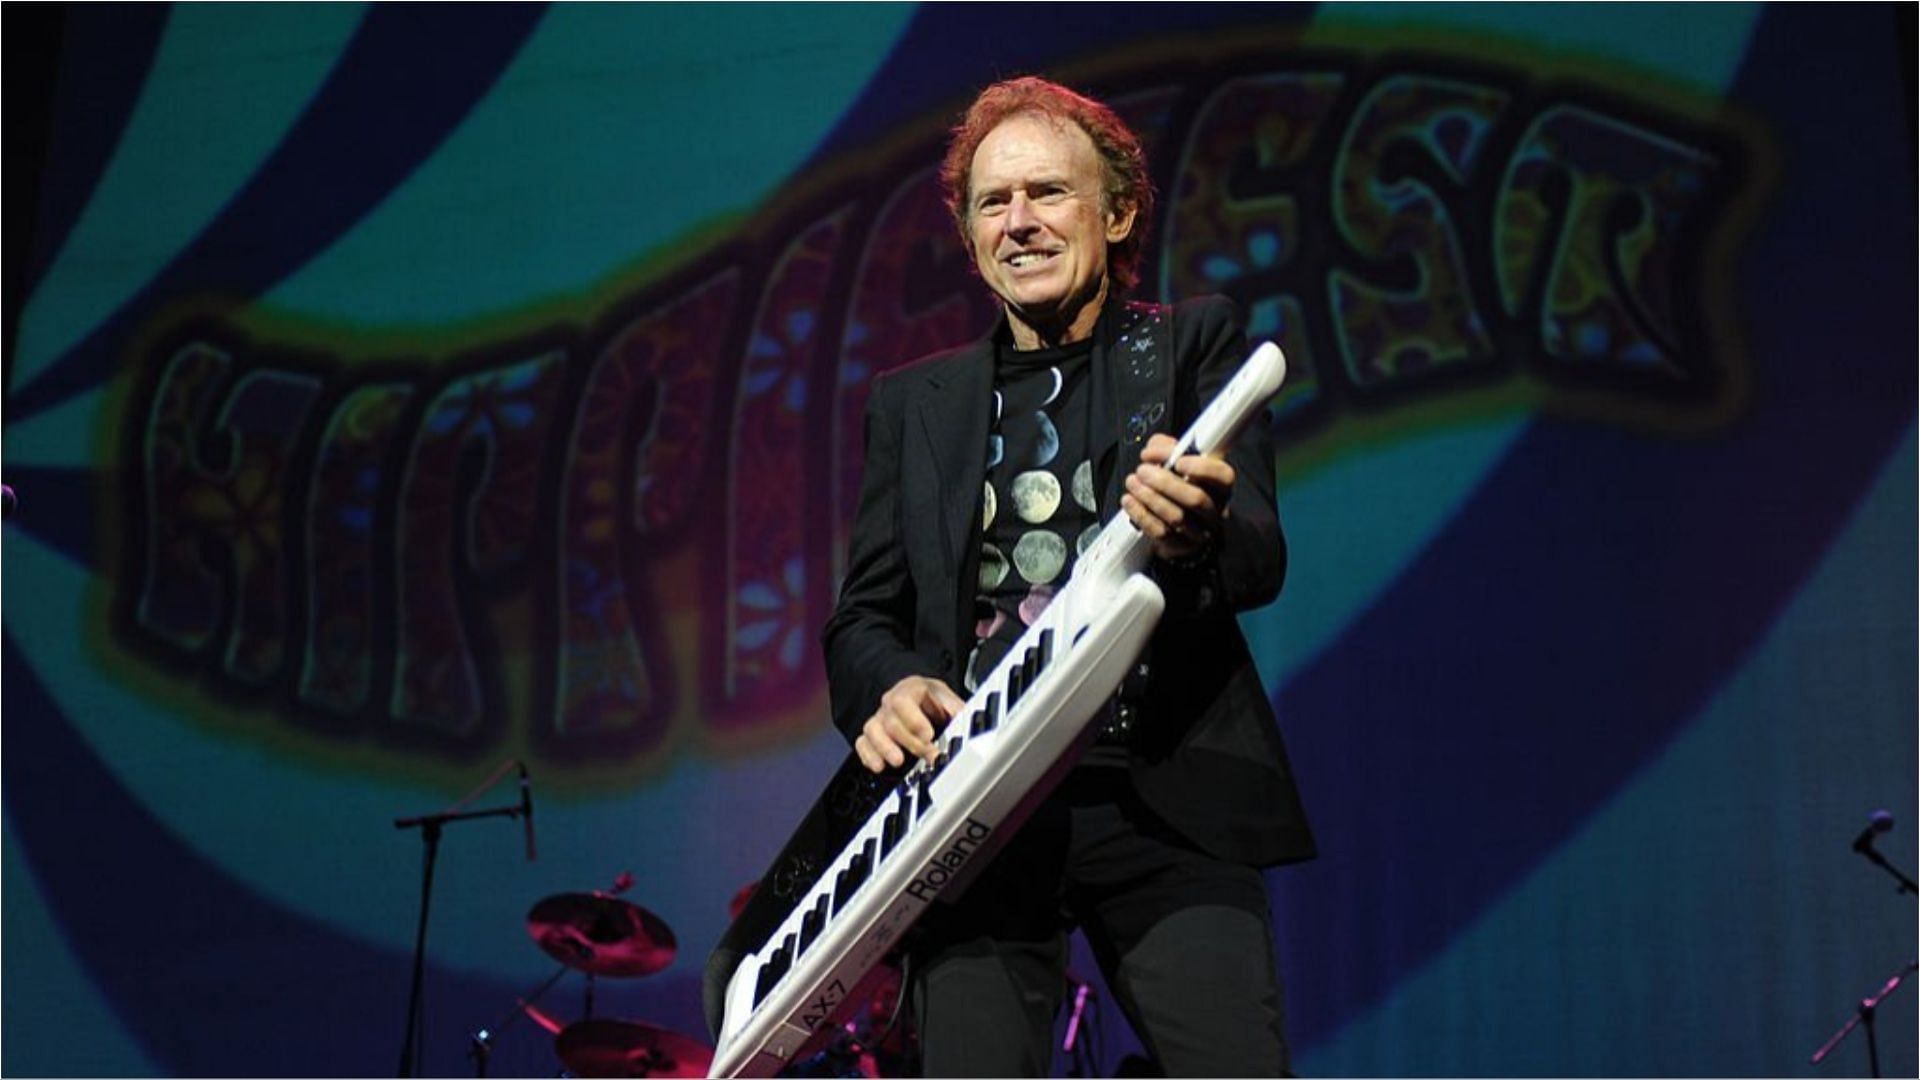 Gary Wright recently died at the age of 80 (Image via Larry Marano/Getty Images)